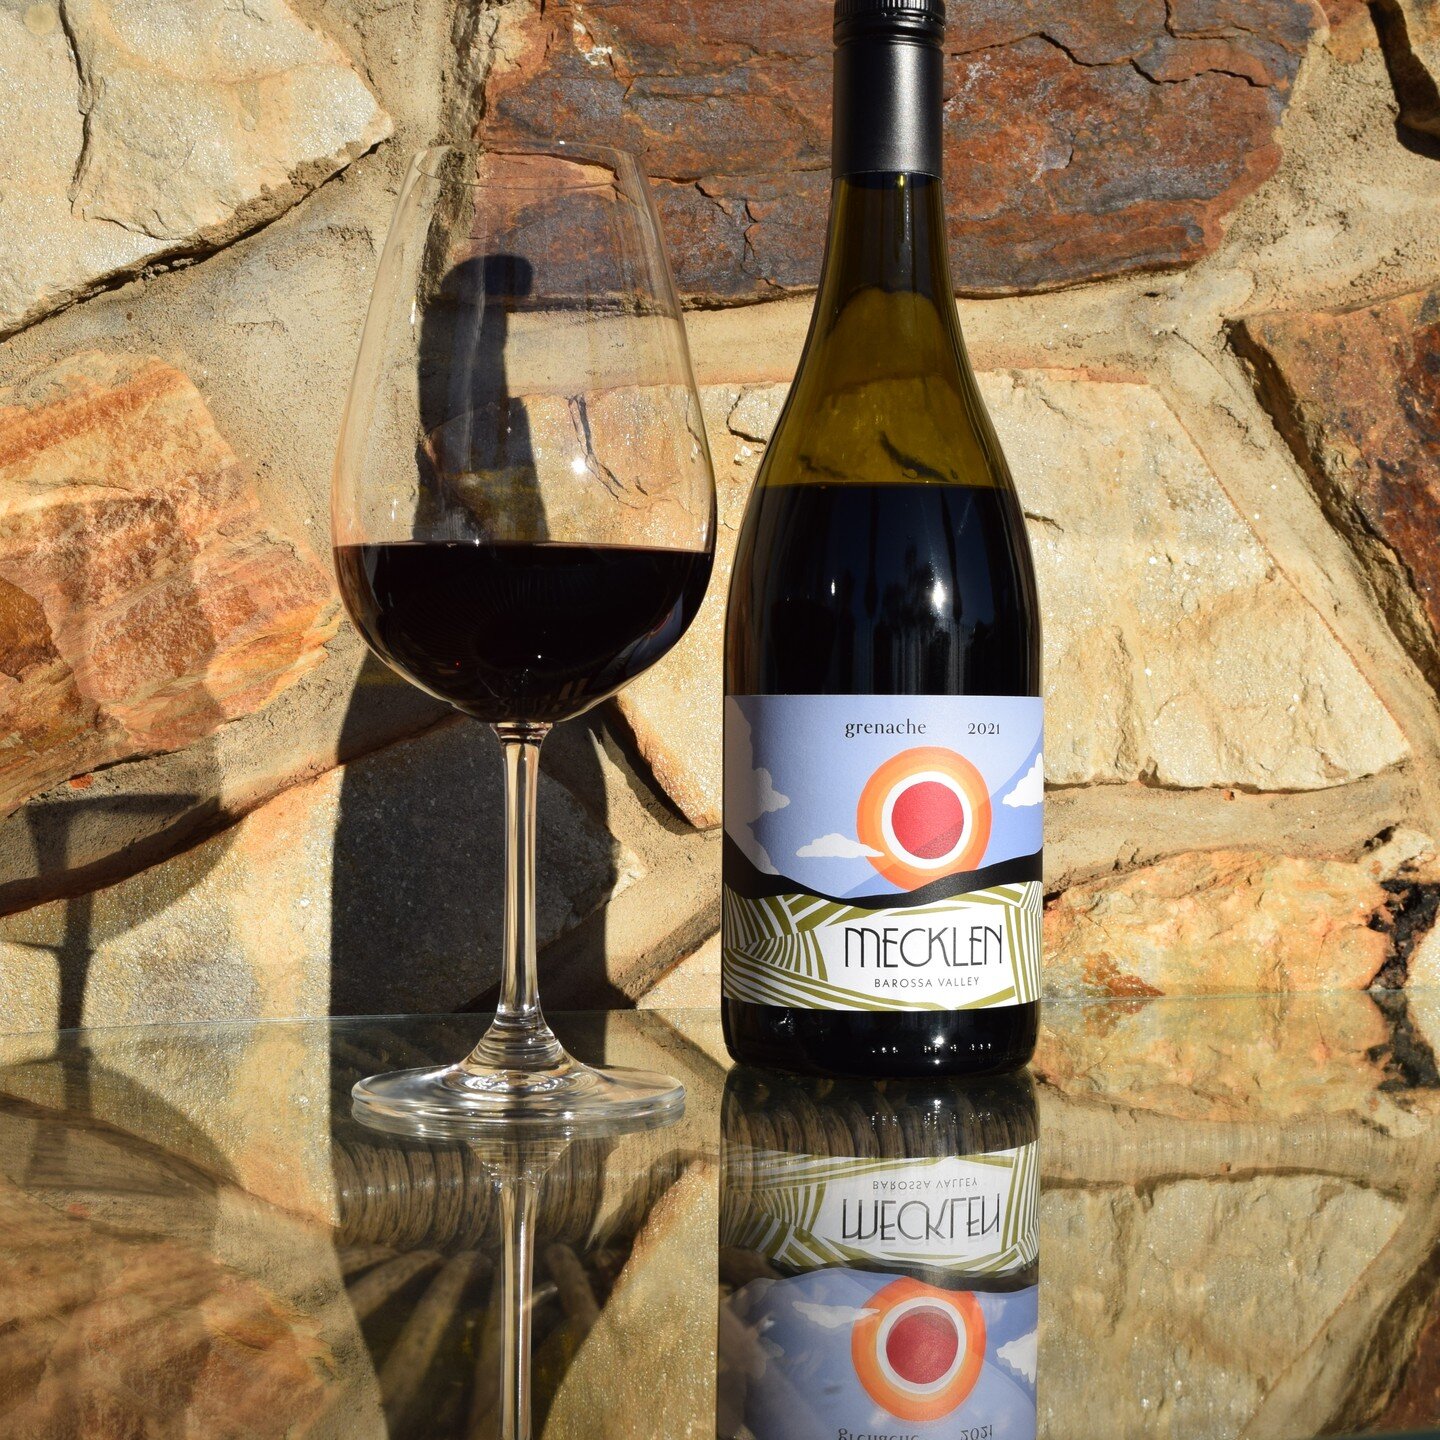 No better way to spend this stunning afternoon than with a glass of Mecklen Wines old vine grenache!

#barossavalley #barossa #winelover #mecklenwines #aussiewine #grenache #vino #oldvine #shirazgrenache #barossawine #barossawines #oldvines